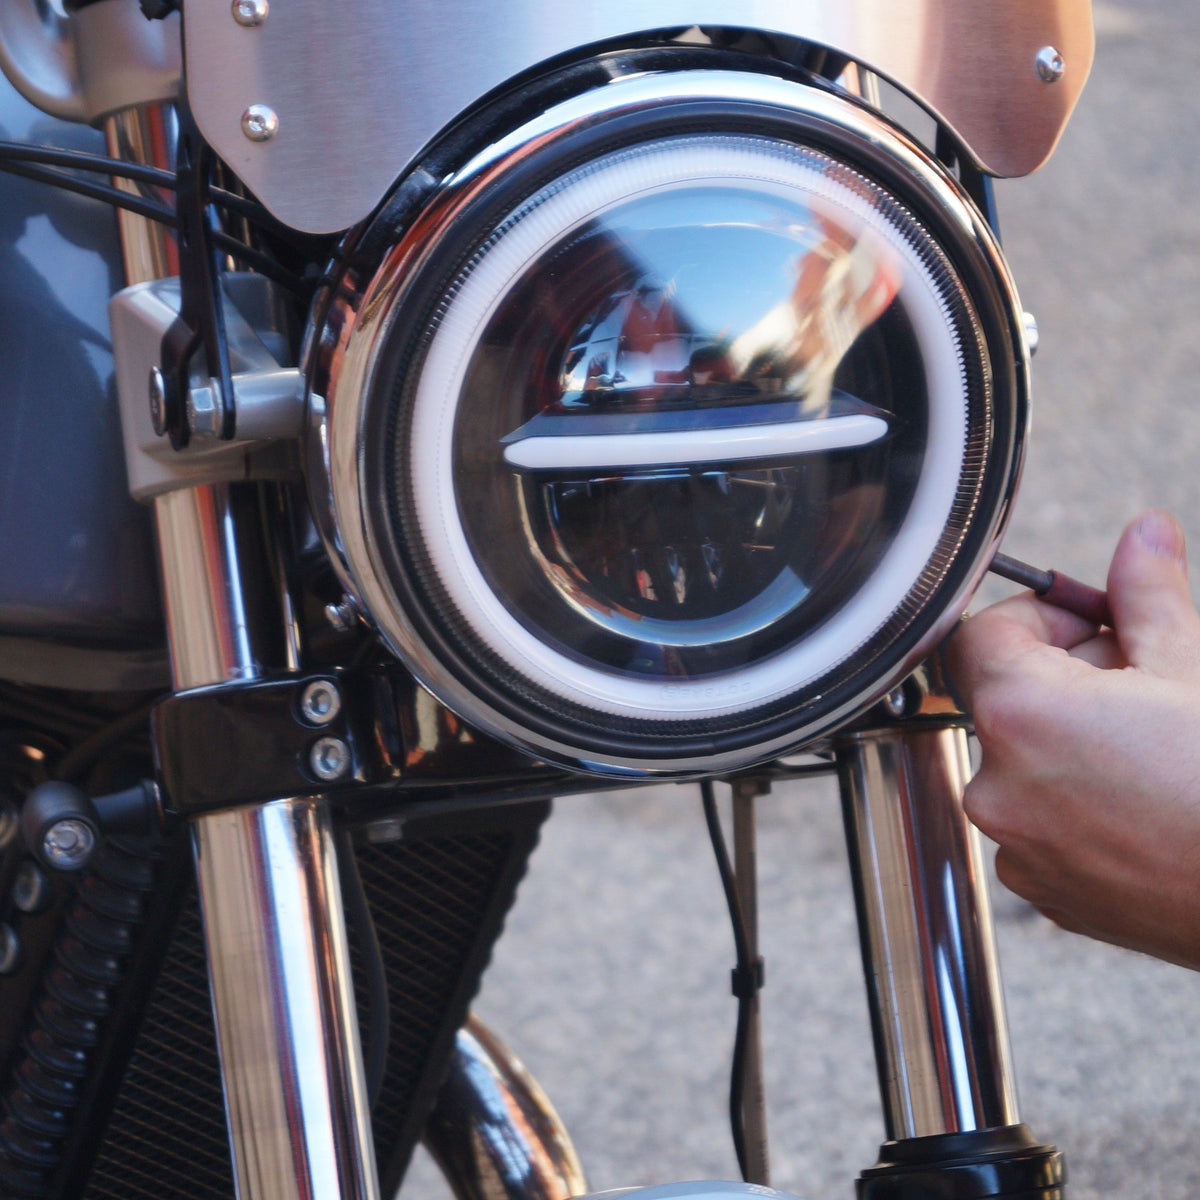 Rogue motorcycles 7&quot; led headlight daytime daymaker h4 custom cafe racer tracker perth australia royal enfield 650